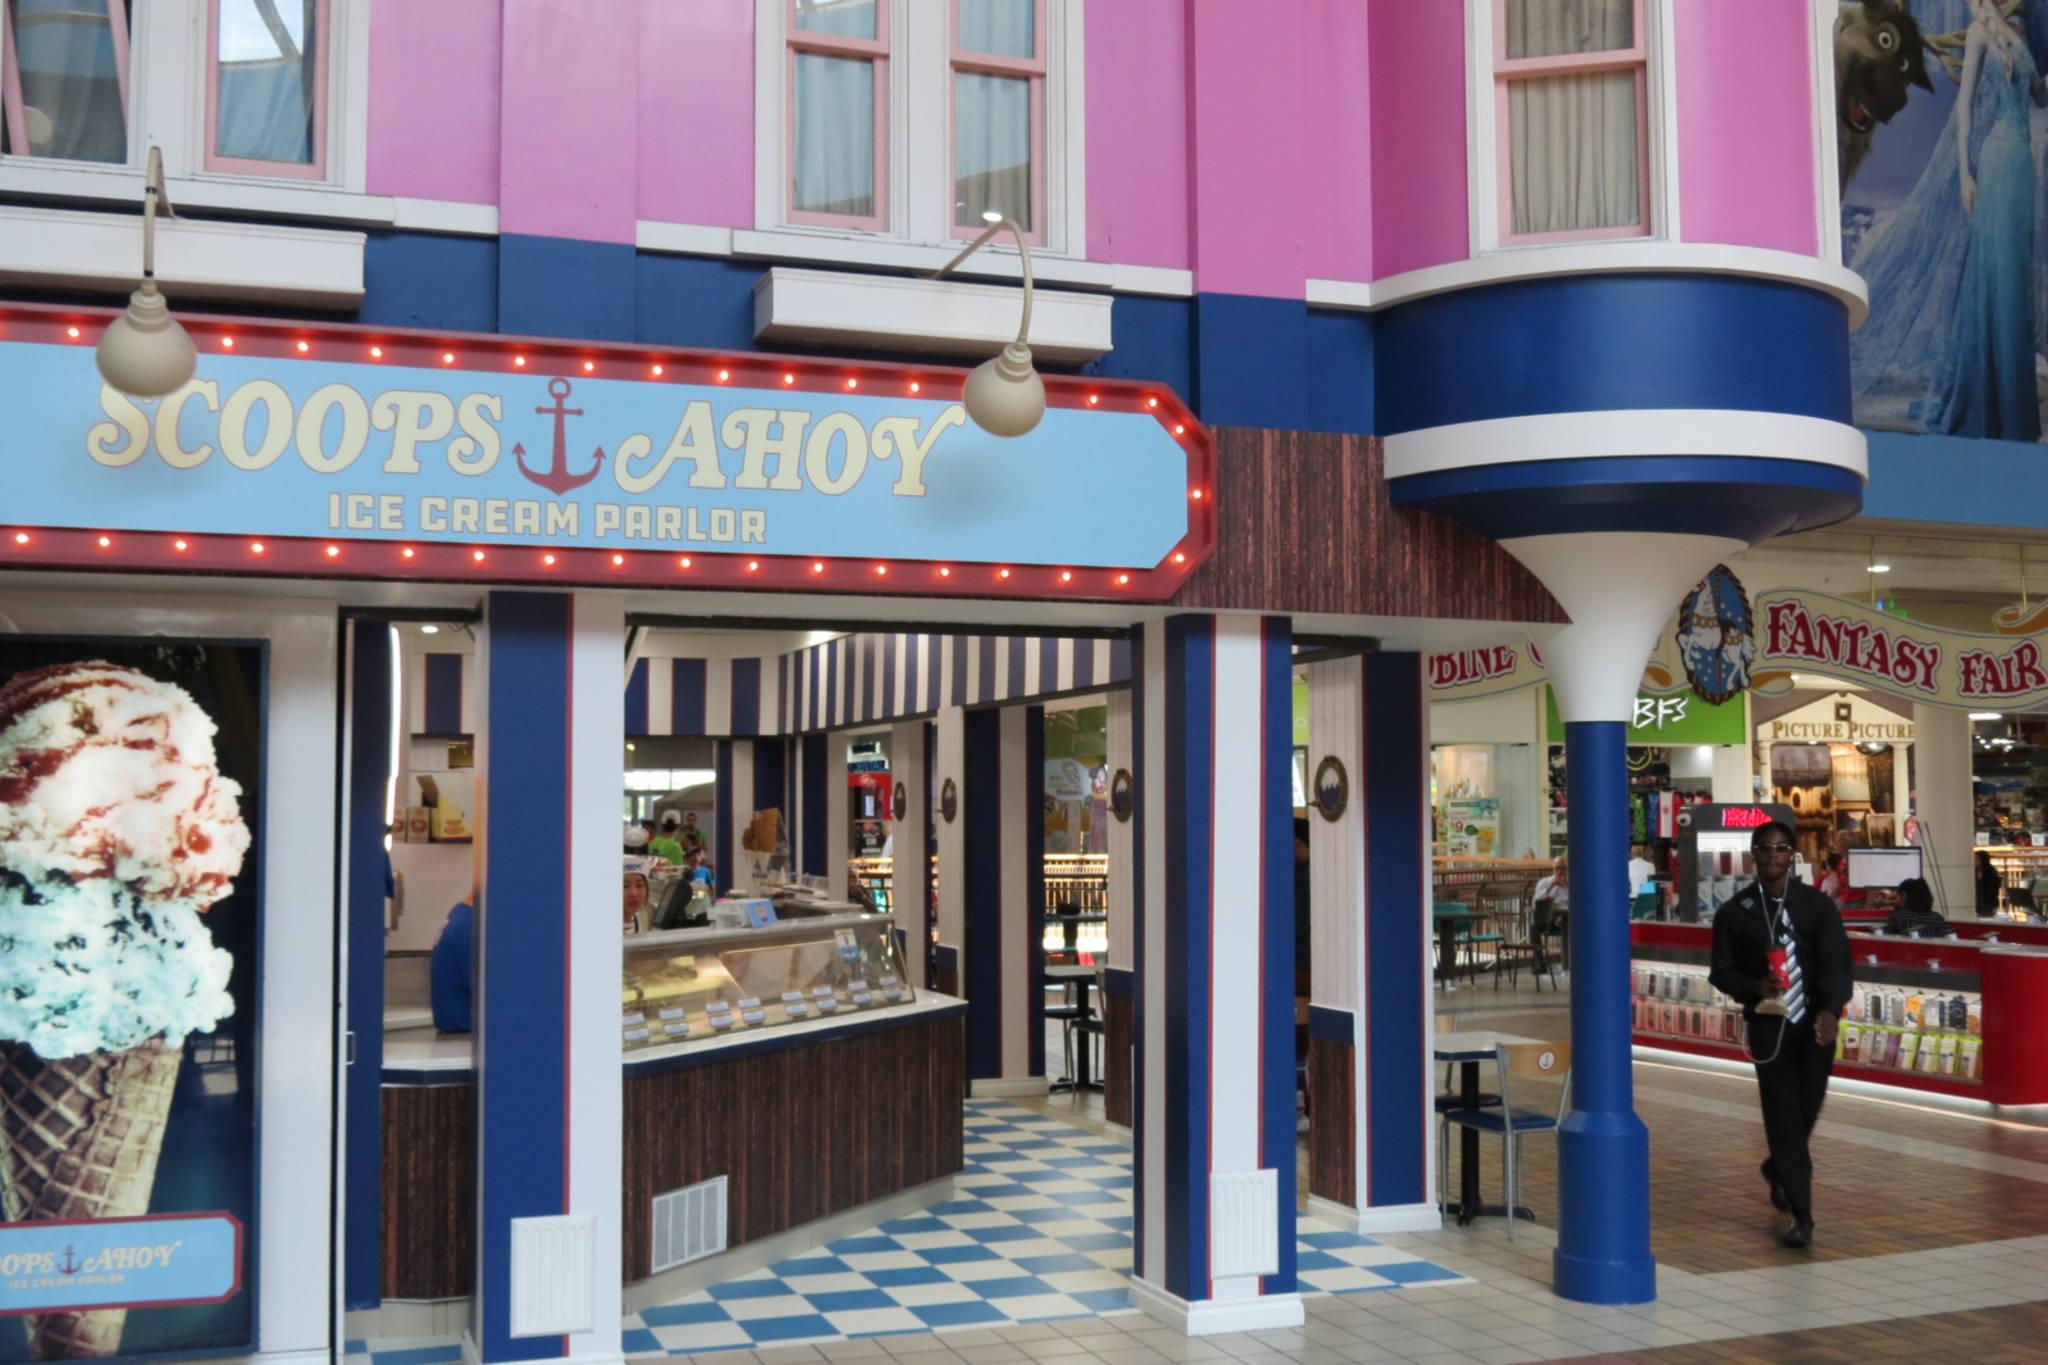 Toronto just got its own Scoops Ahoy from Stranger Things